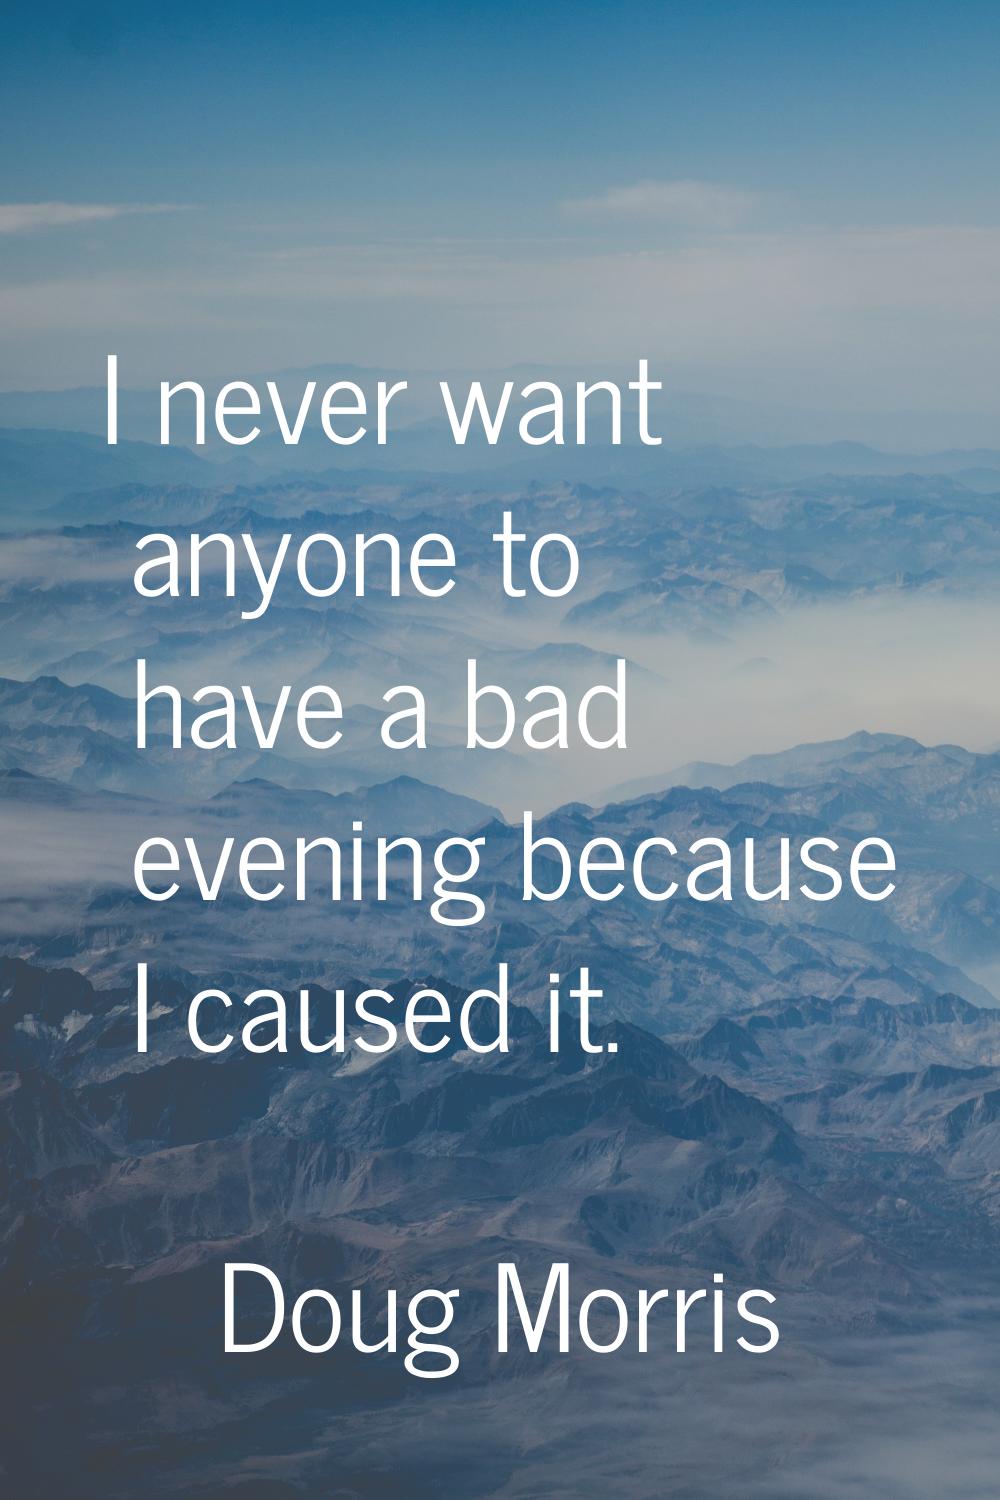 I never want anyone to have a bad evening because I caused it.